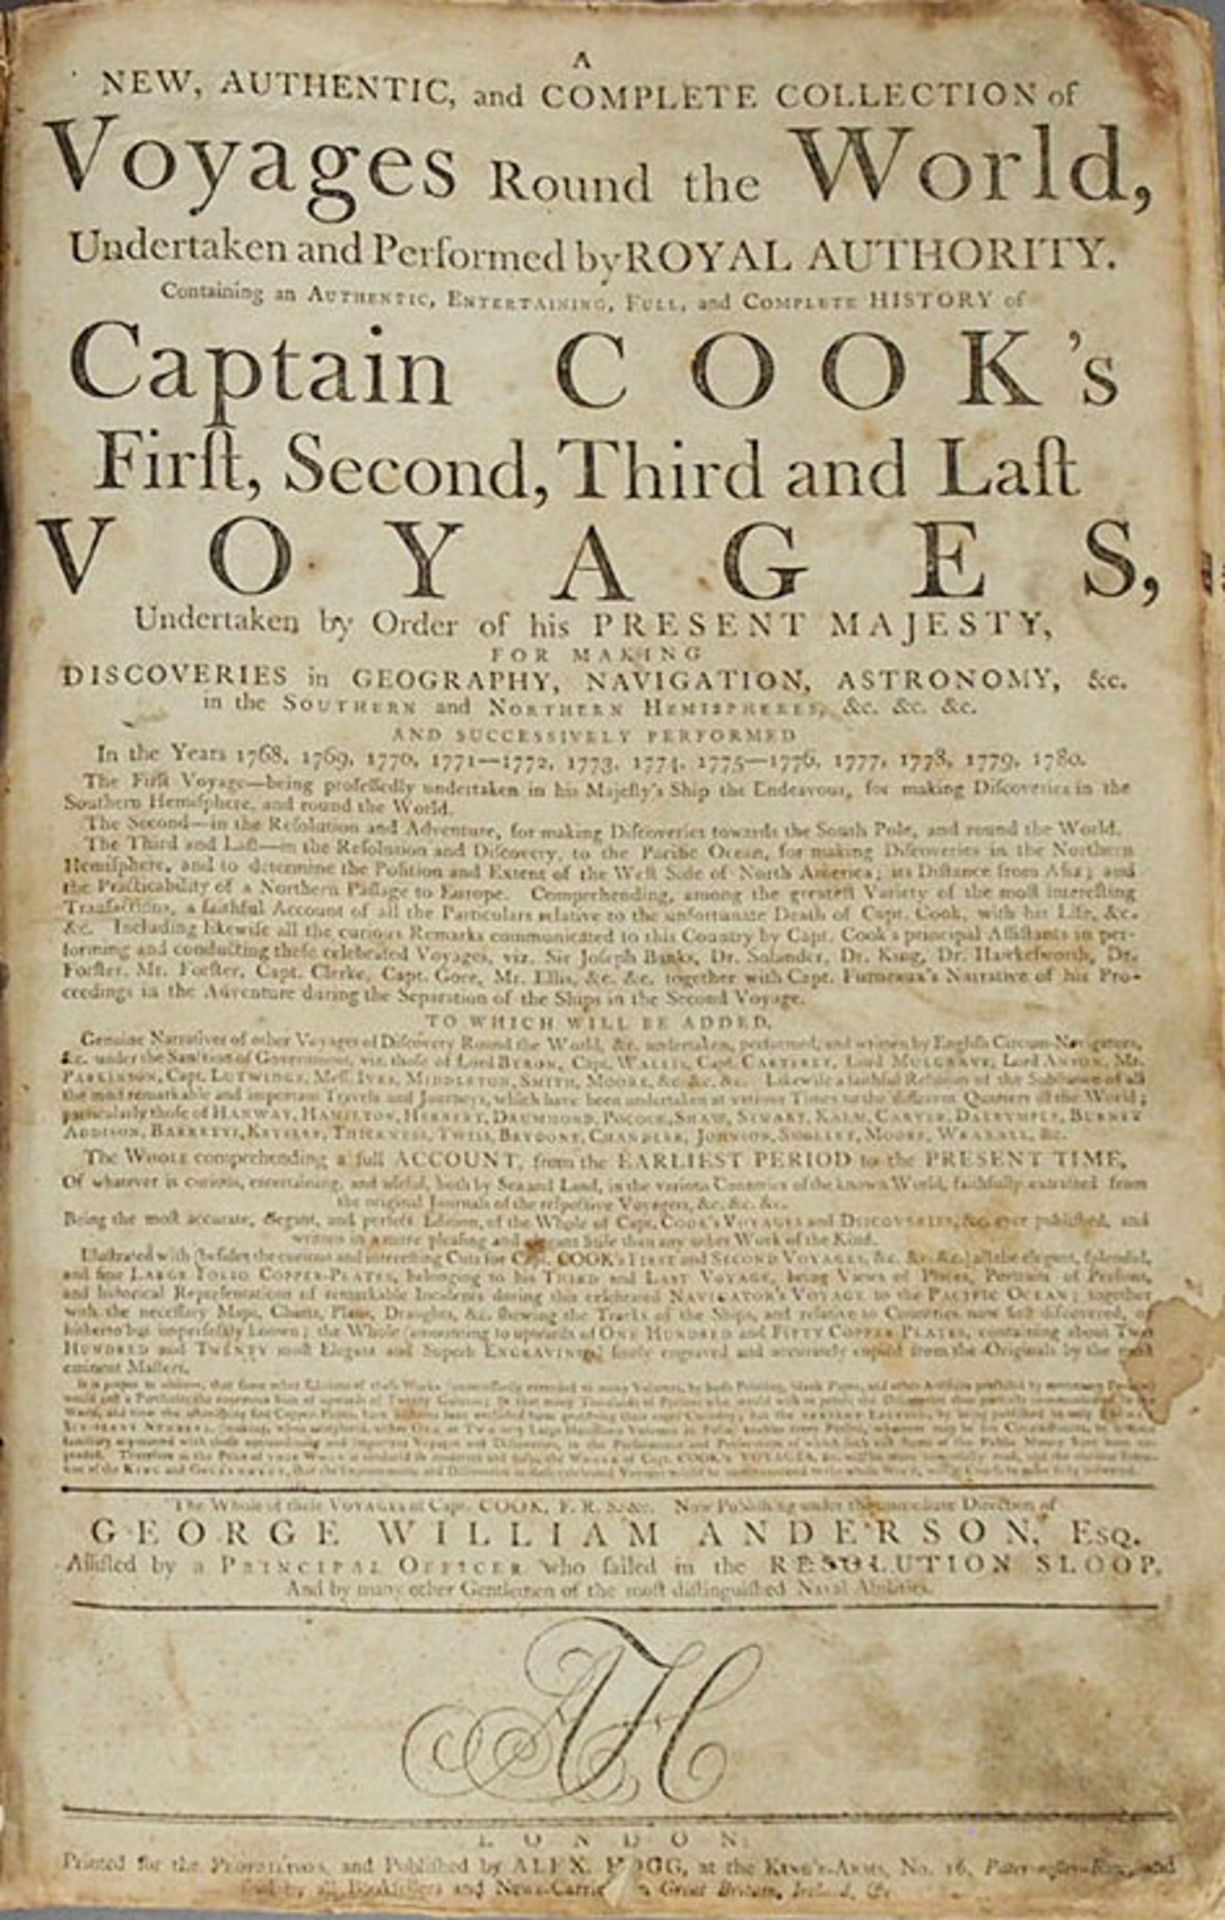 ANDERSON, George William: A New, Authentic, and Complete Collection of Voyages